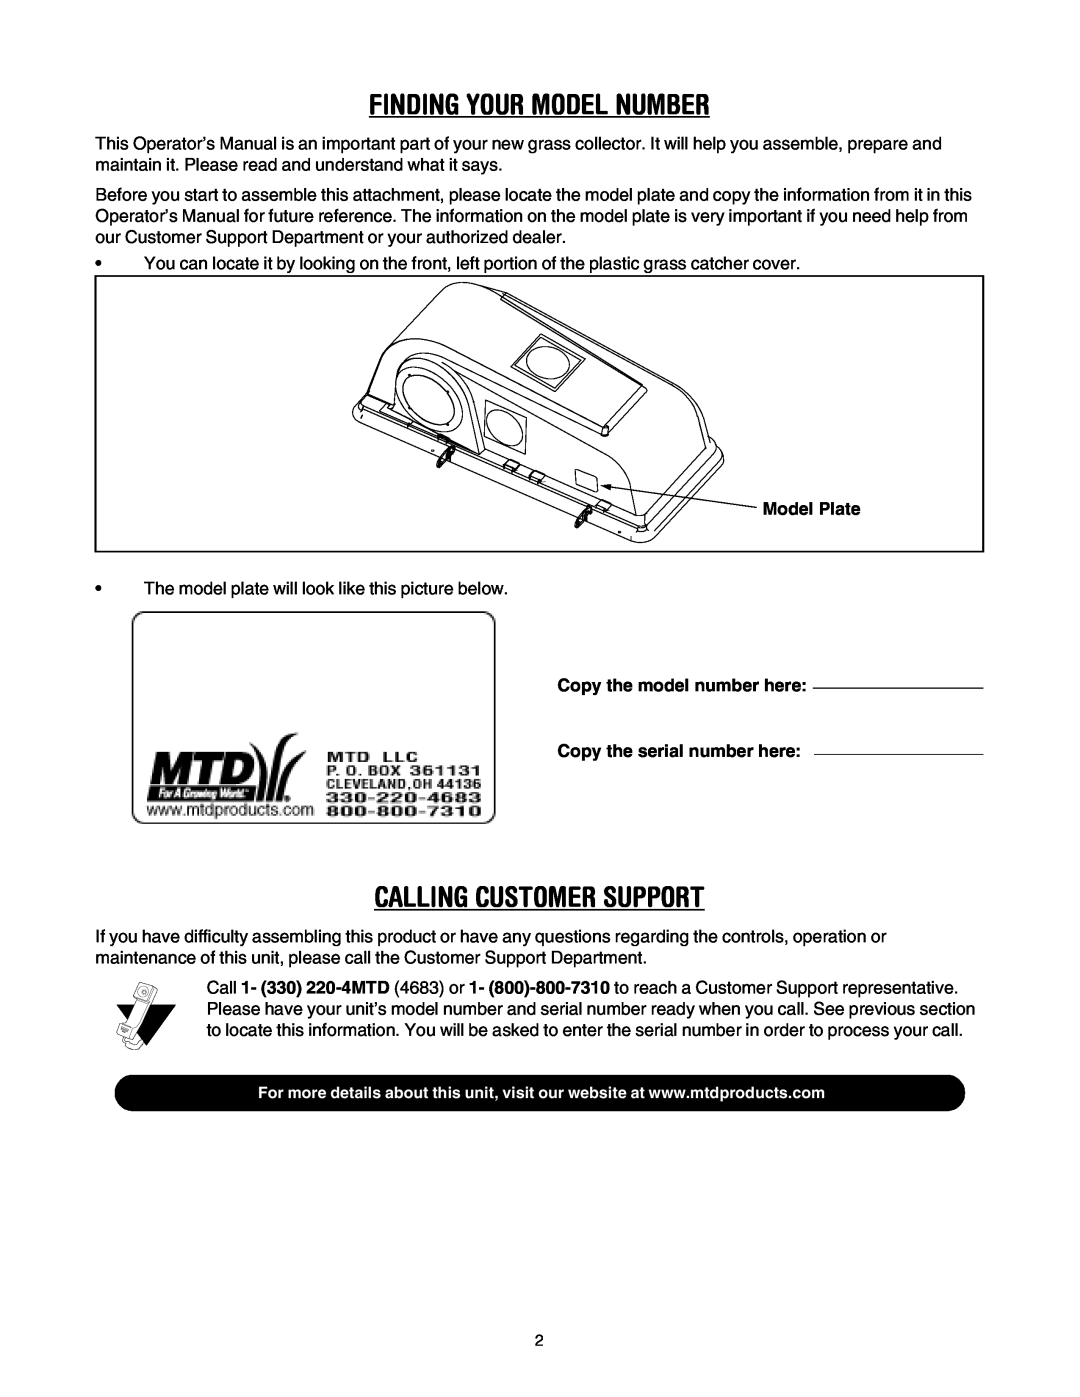 MTD Lawn Tracto manual Finding Your Model Number, Calling Customer Support, Copy the model number here 